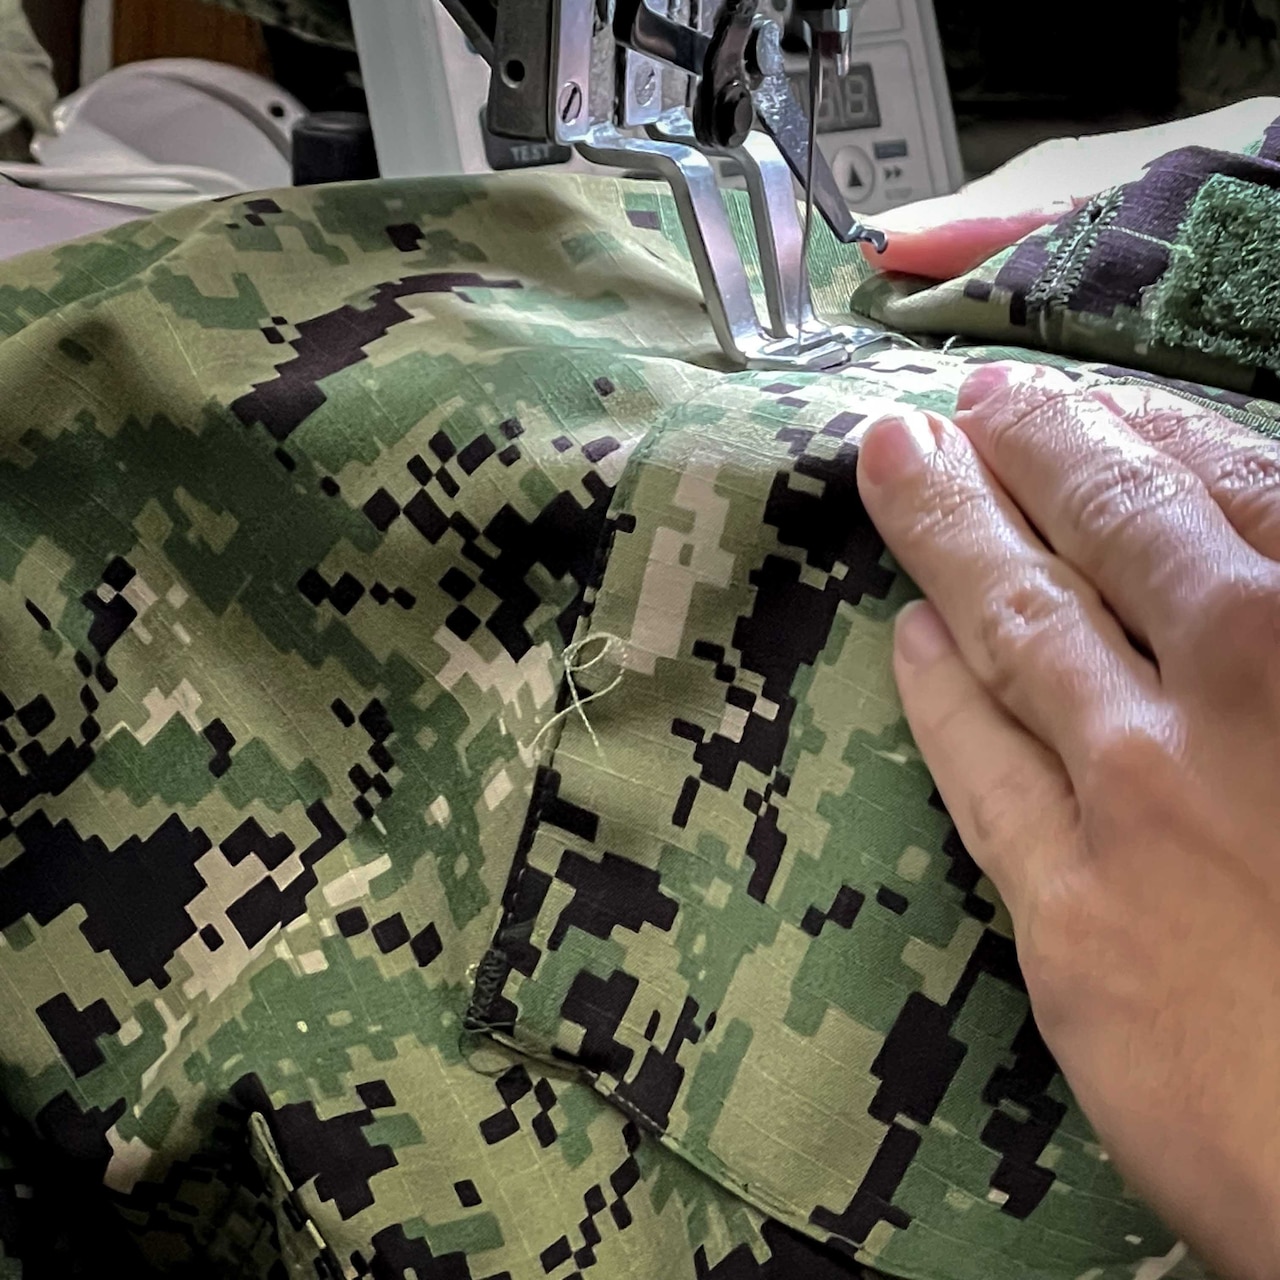 A close-up photo shows the hands of a person using a sewing machine to stitch a military uniform.